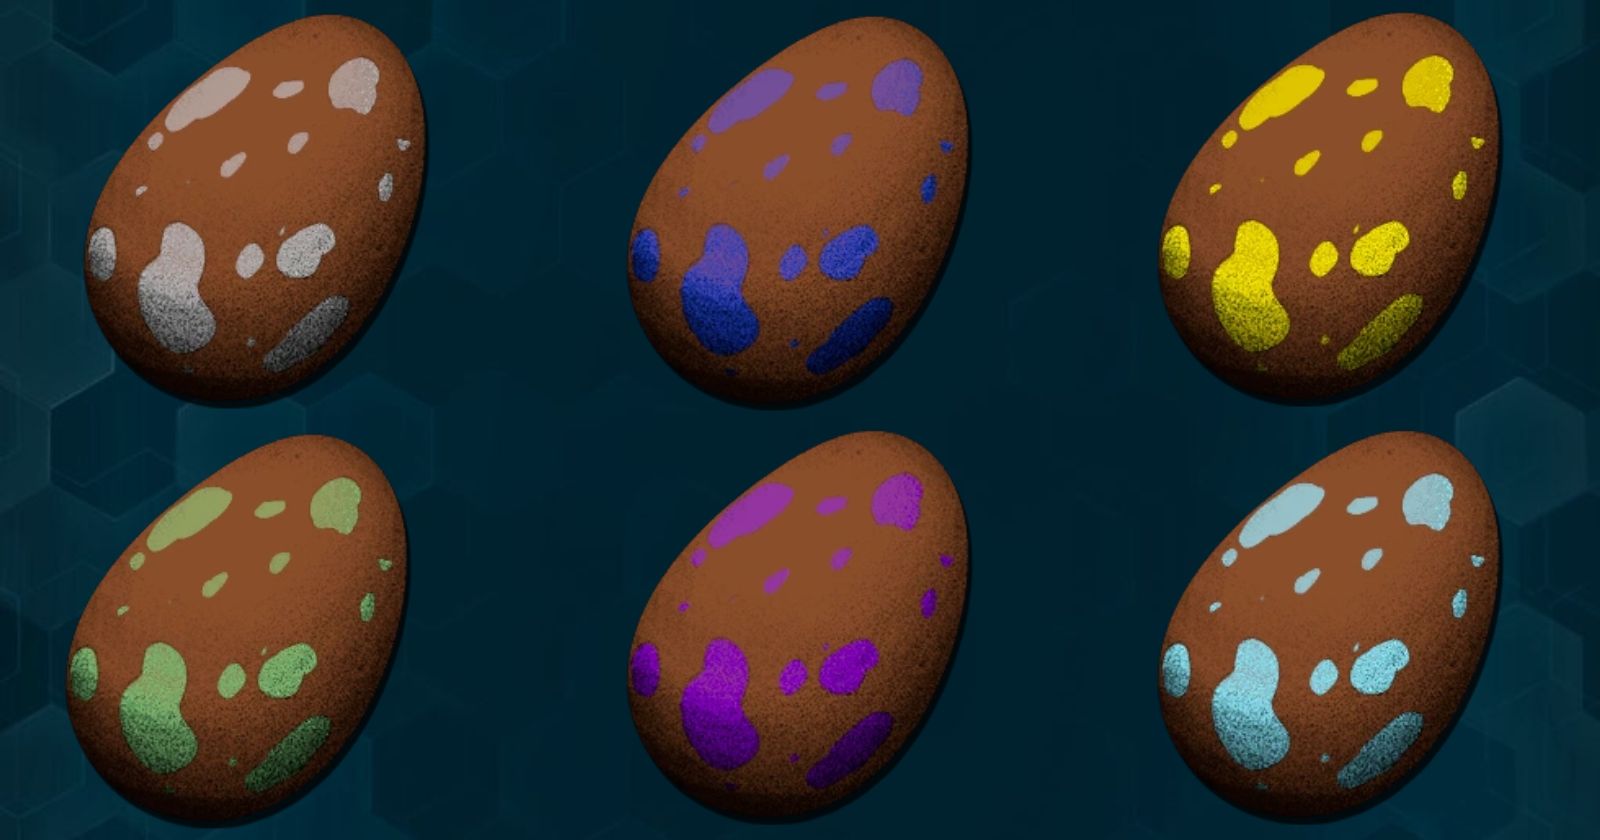 the different maewing eggs